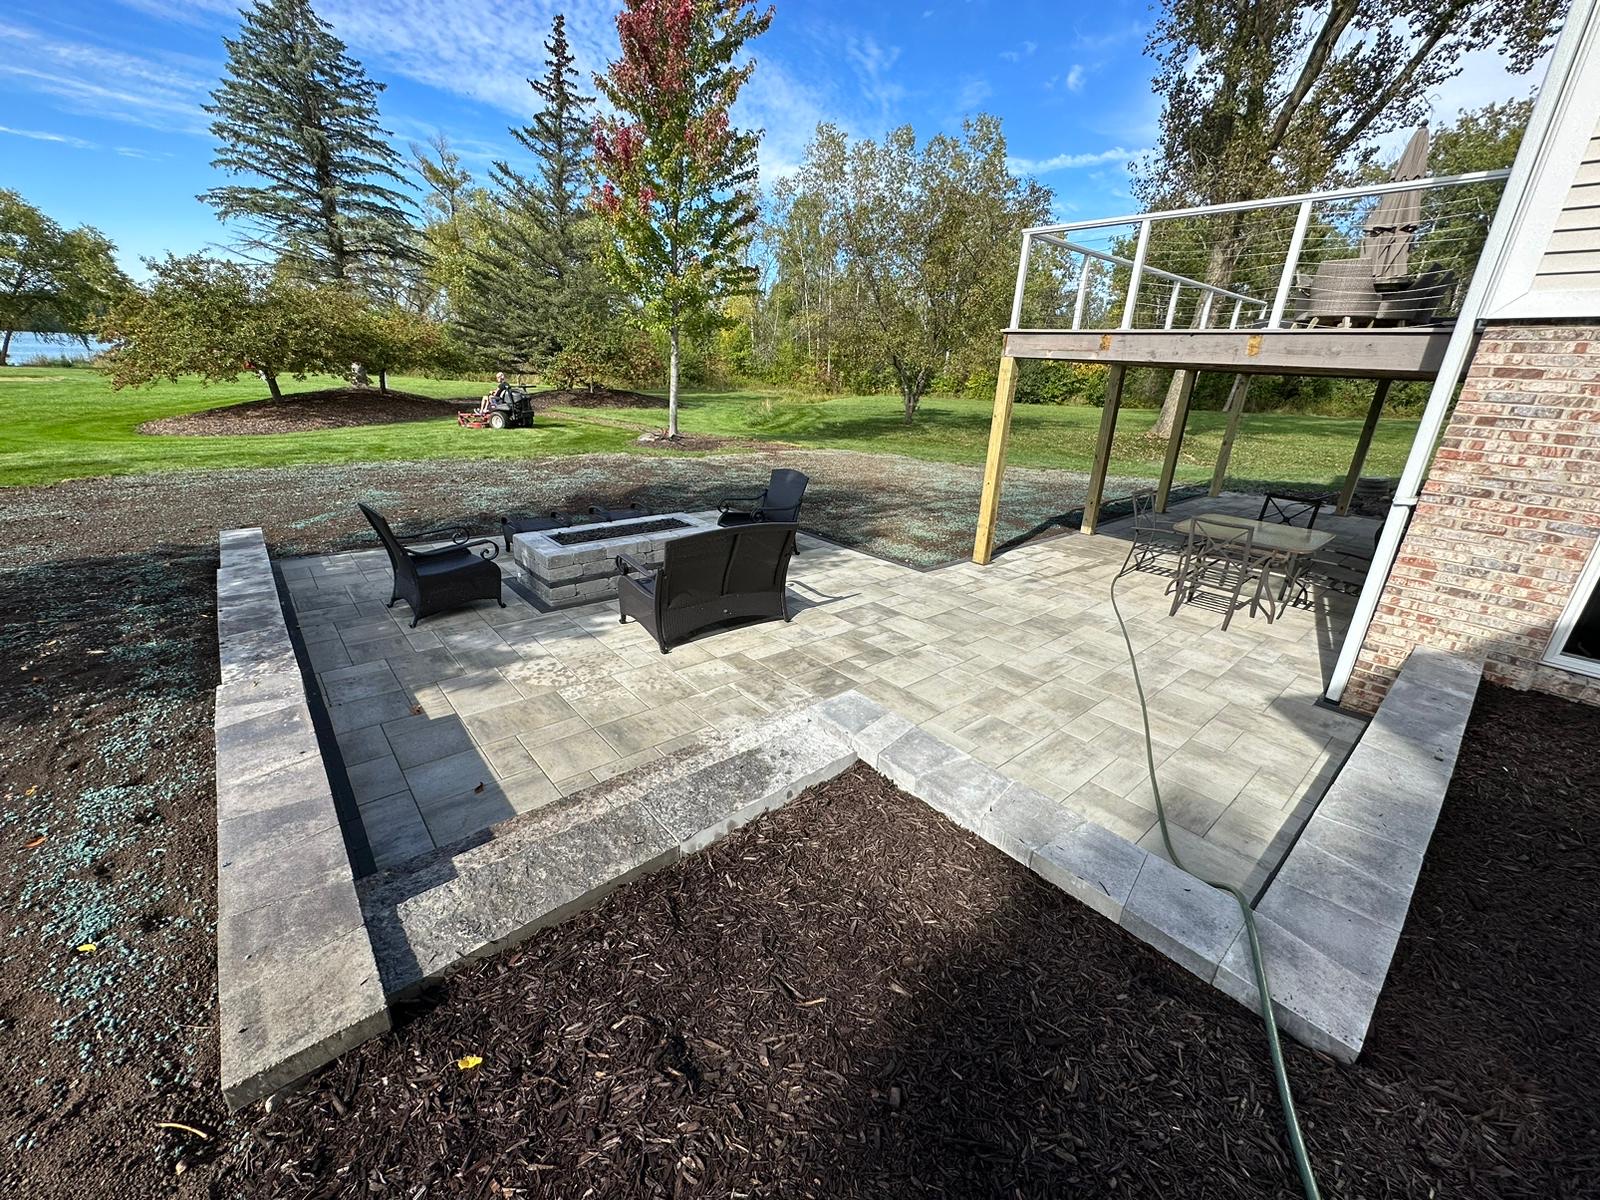 Backyard Patio with Small Retaining Walls and a Fire Pit